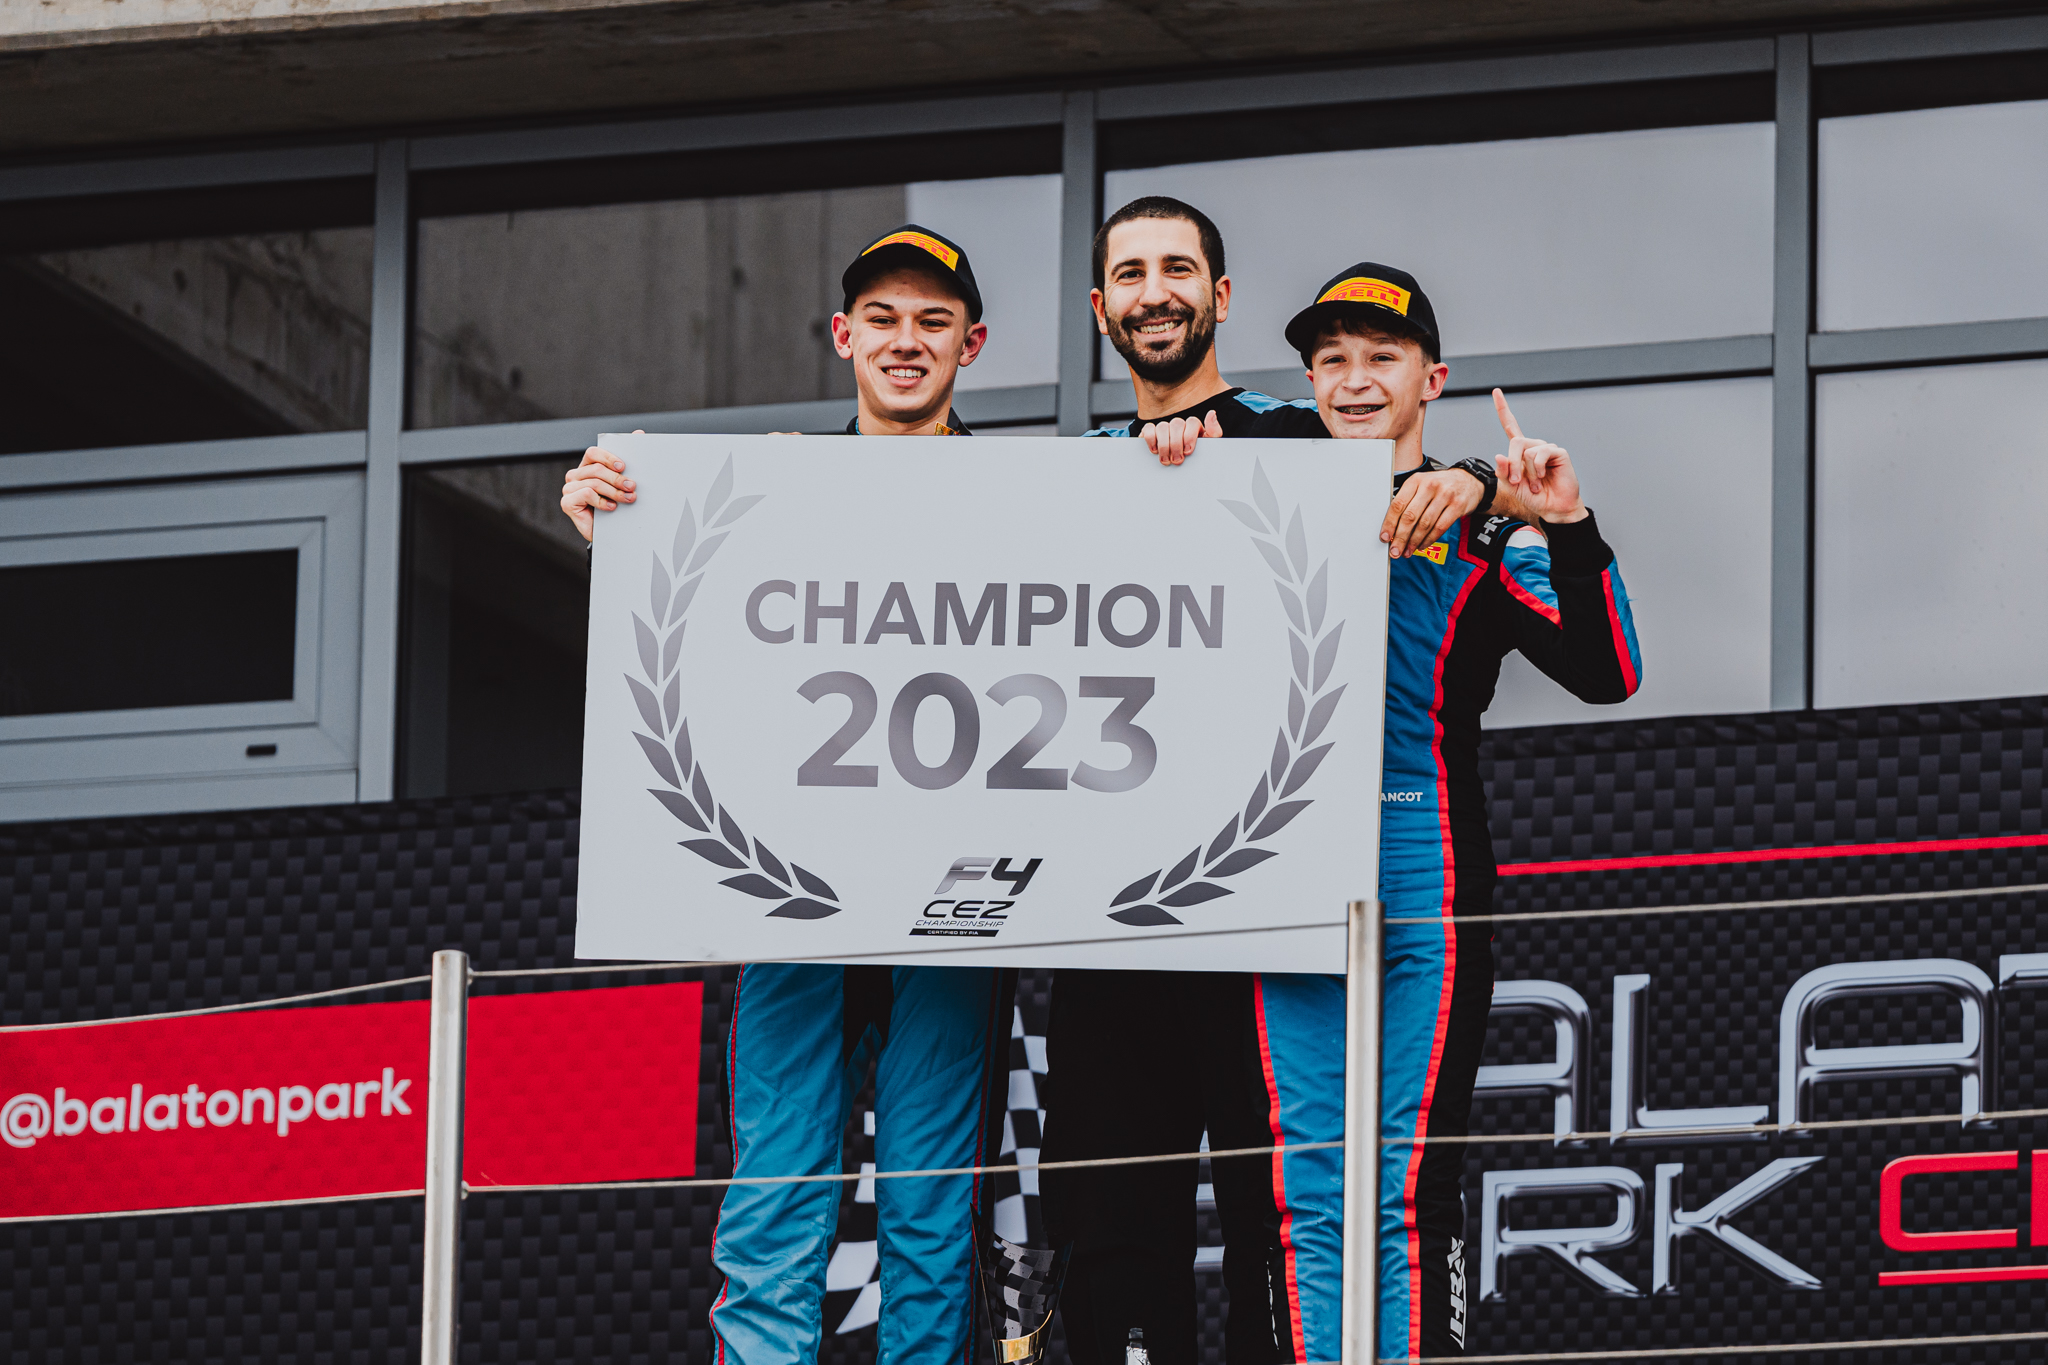 Ethan Ischer becomes the first champion of the inaugural season of F4 CEZ Certified by FIA